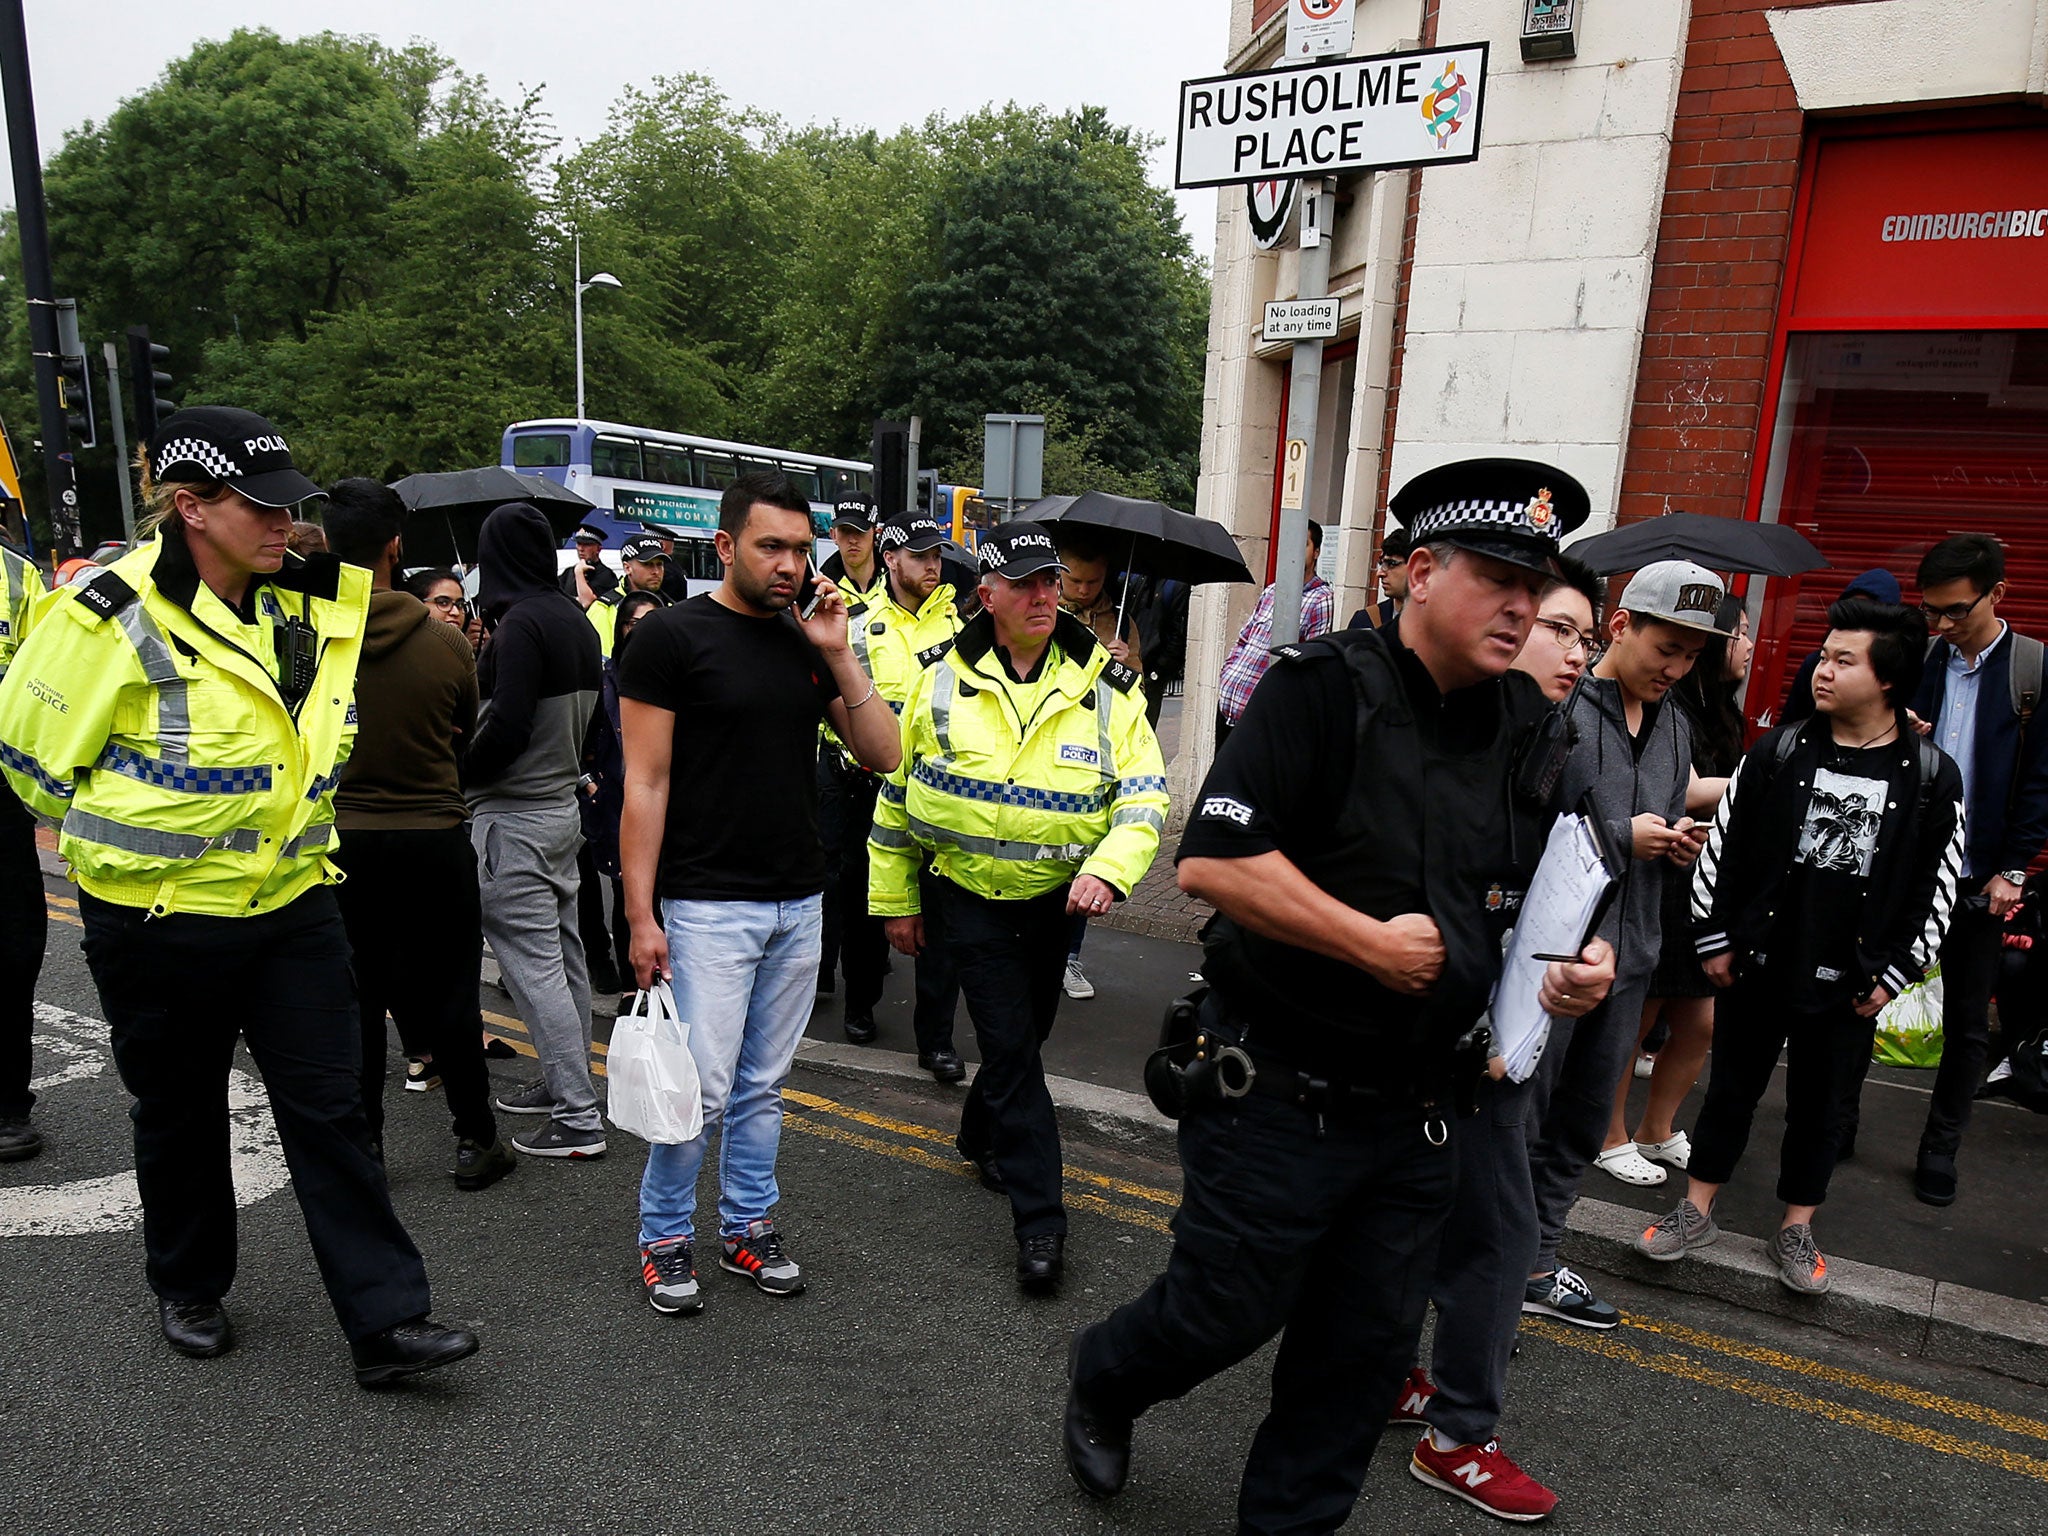 Police and evacuated students and residents at a cordon in Rusholme, Manchester, on 2 June Reuters